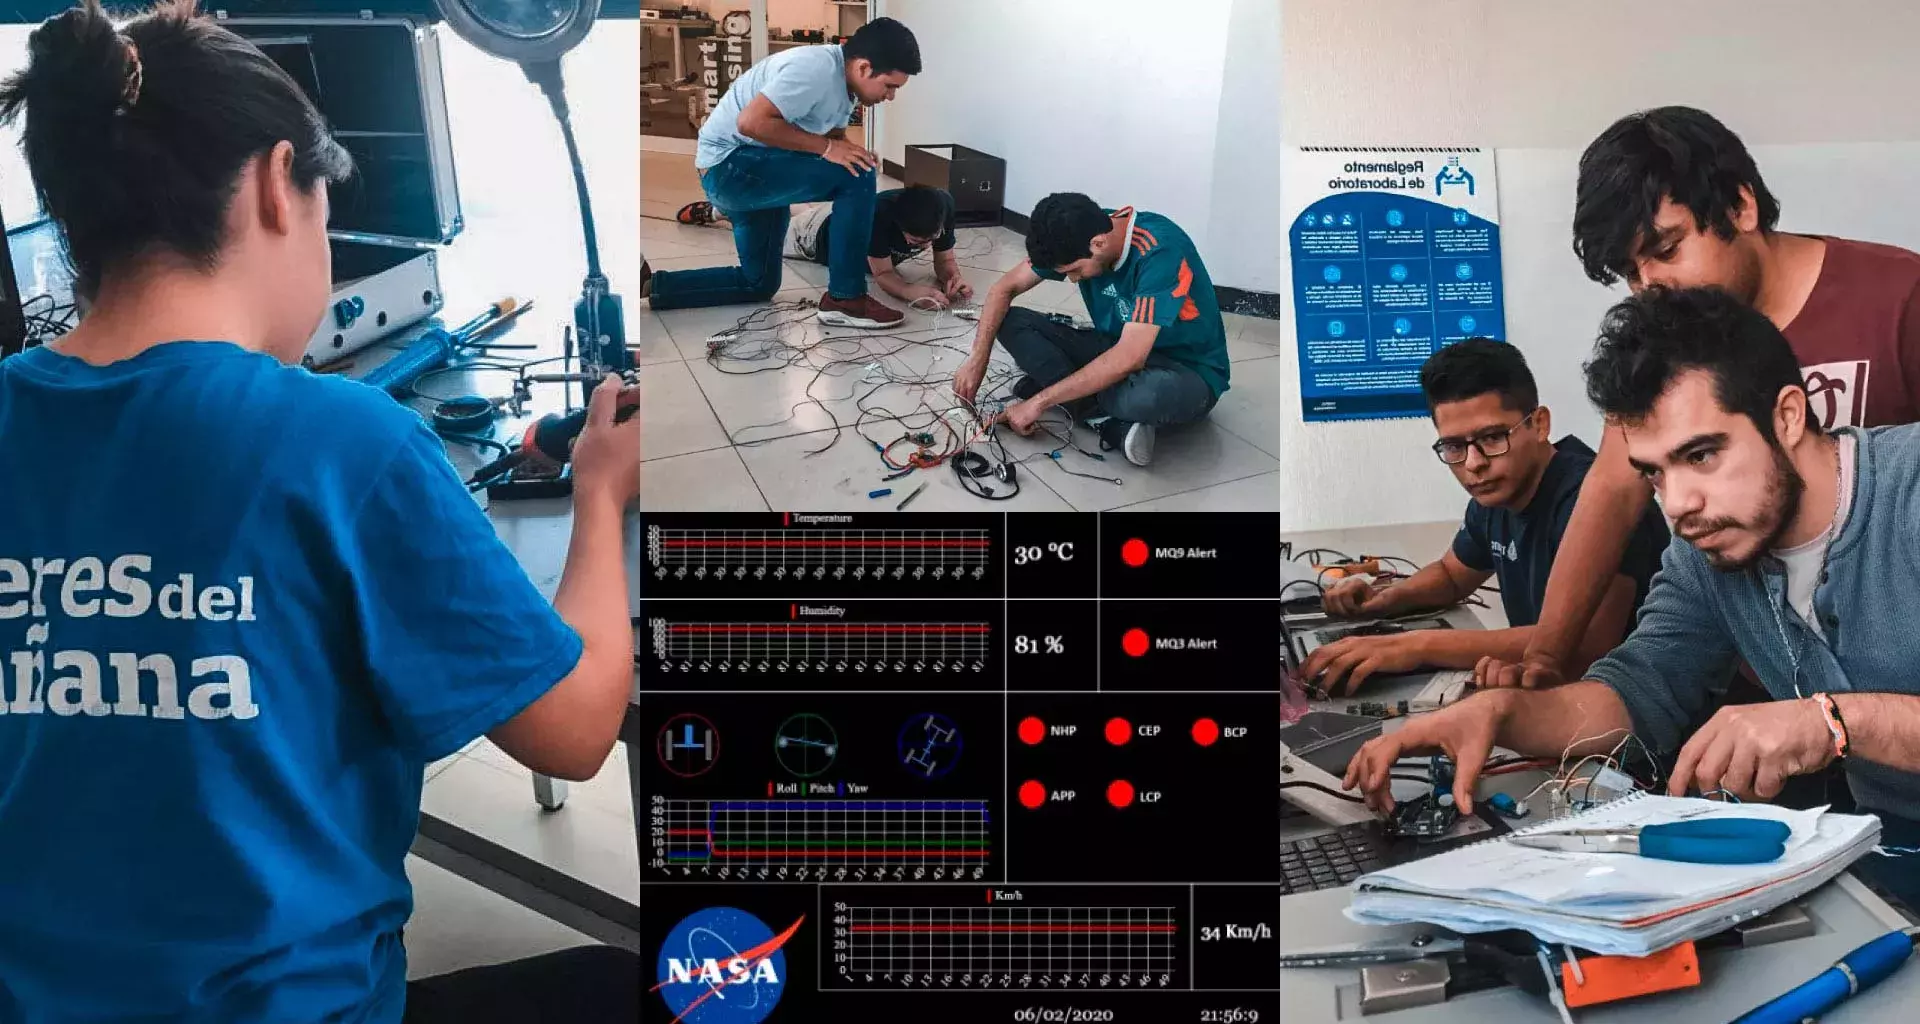 They’ve done it again! Third-time winners of the NASA telemetry prize